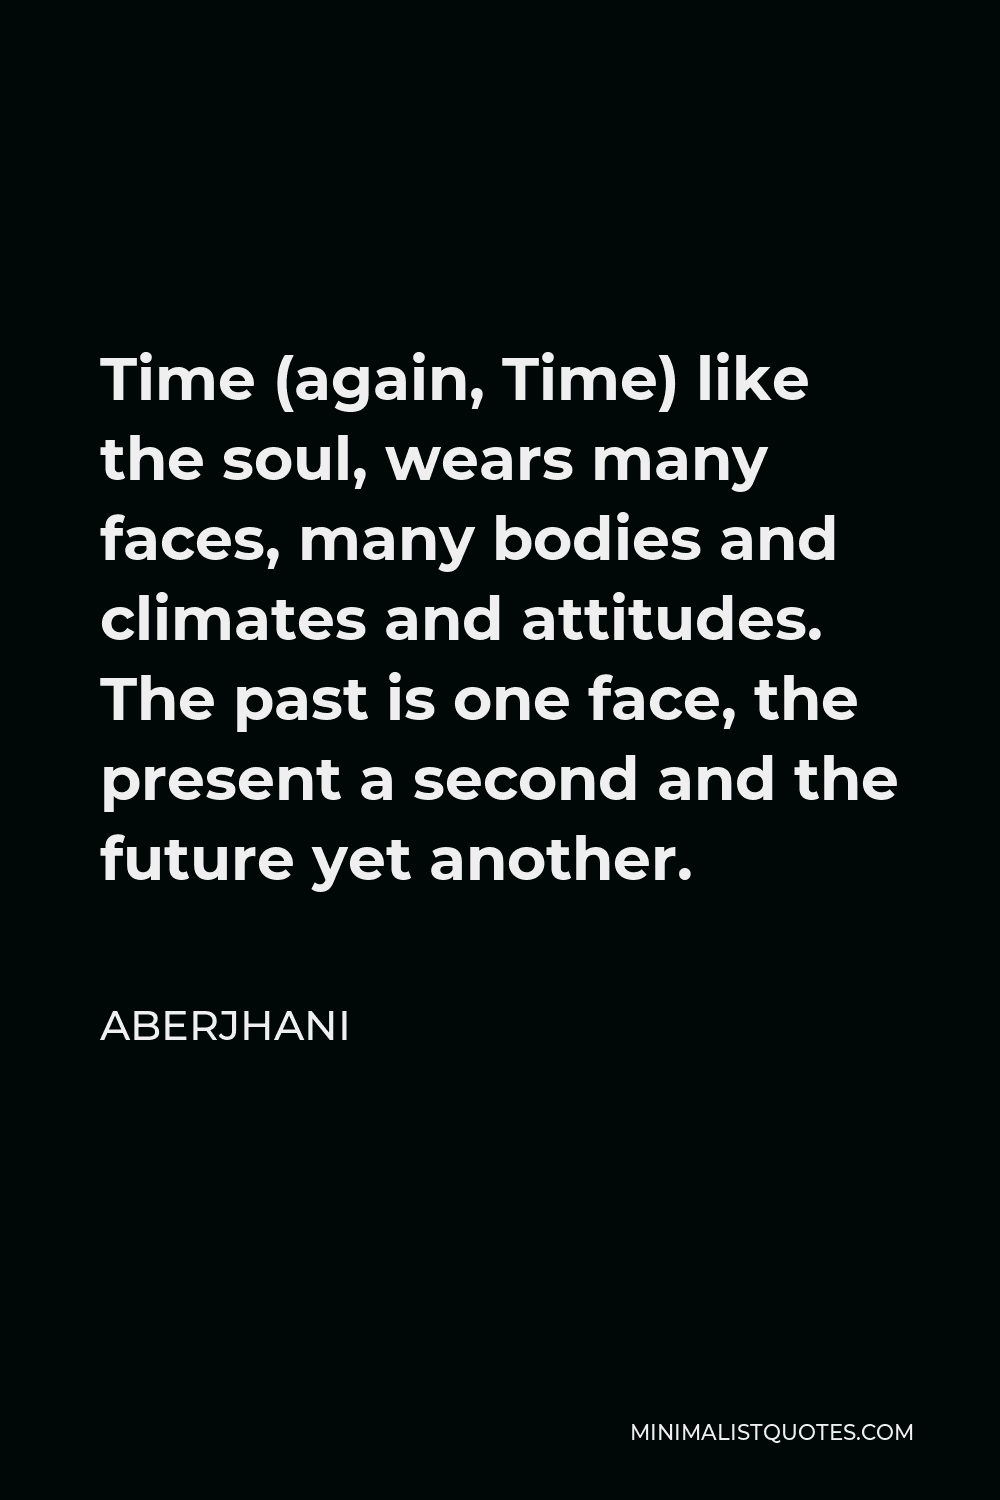 Aberjhani Quote - Time (again, Time) like the soul, wears many faces, many bodies and climates and attitudes. The past is one face, the present a second and the future yet another.